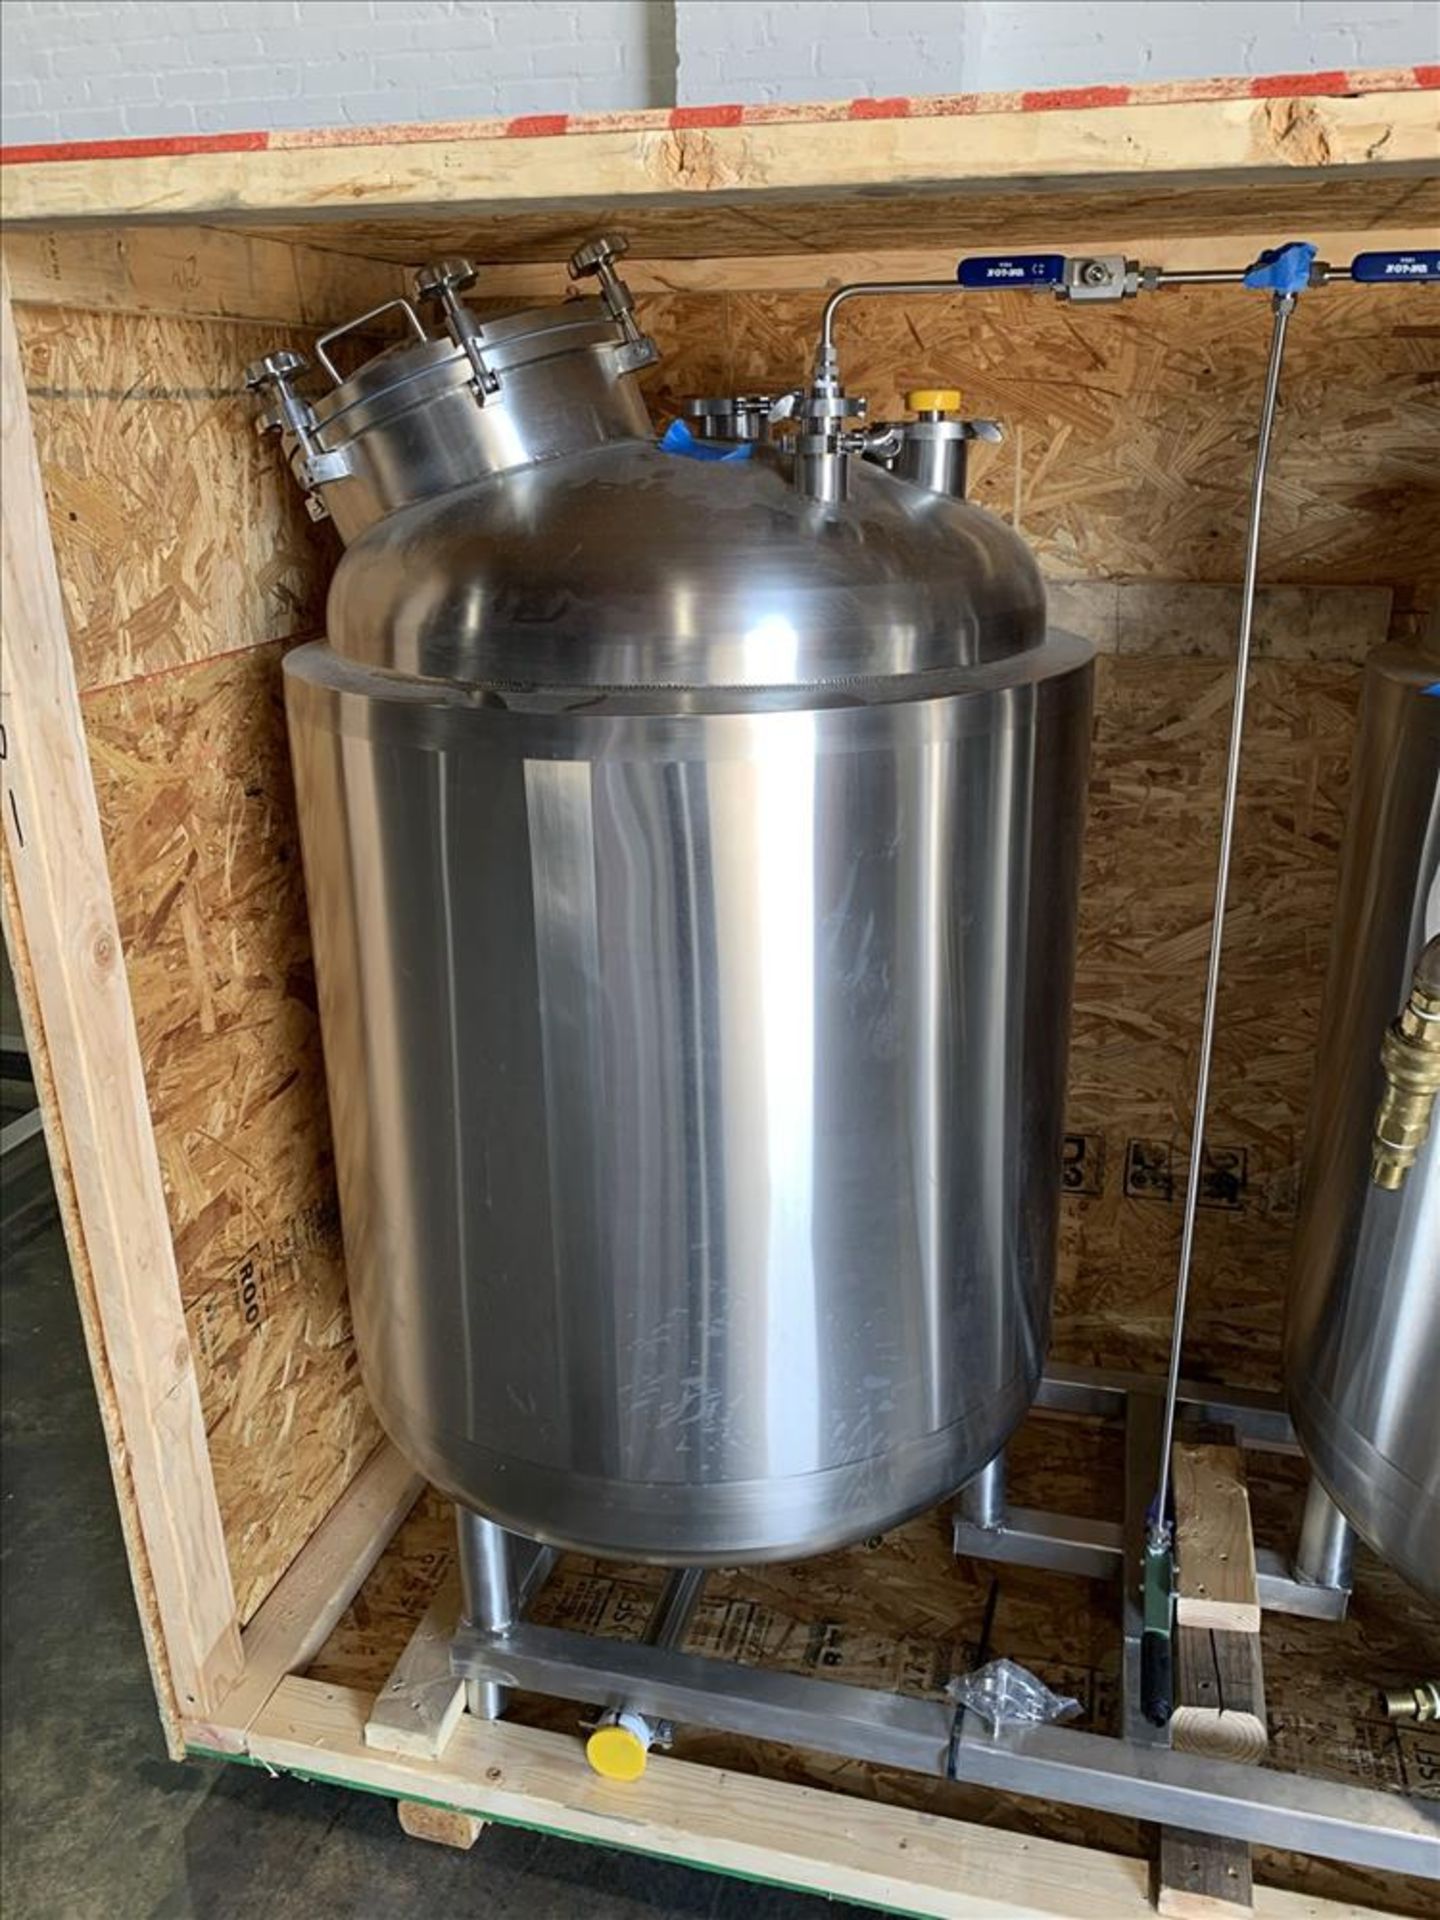 New In Crates - Eden Labs LLC Industrial 500 Gallon Performance Solvent Recovery System - Image 41 of 152